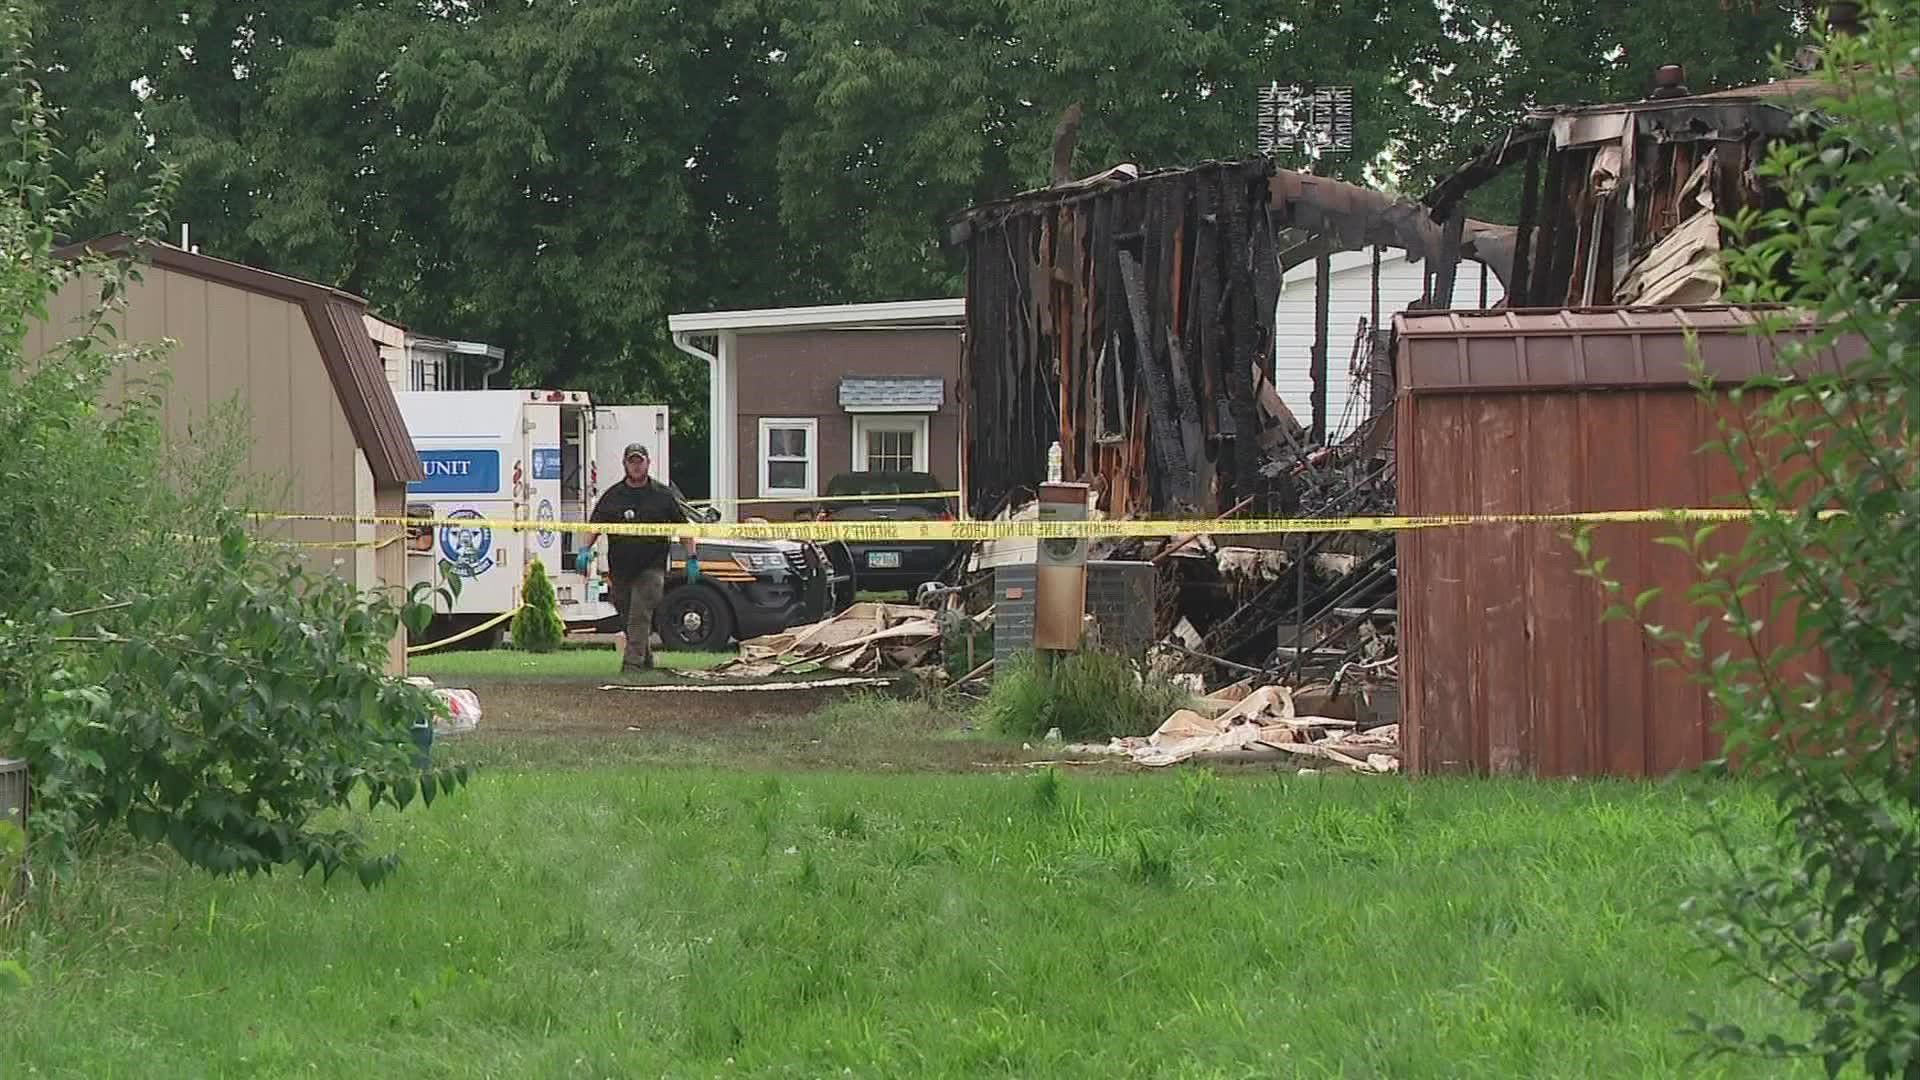 Authorities have confirmed that two bodies were recovered from a mobile home following a blaze and gunfire that killed a sheriff’s deputy over the weekend.